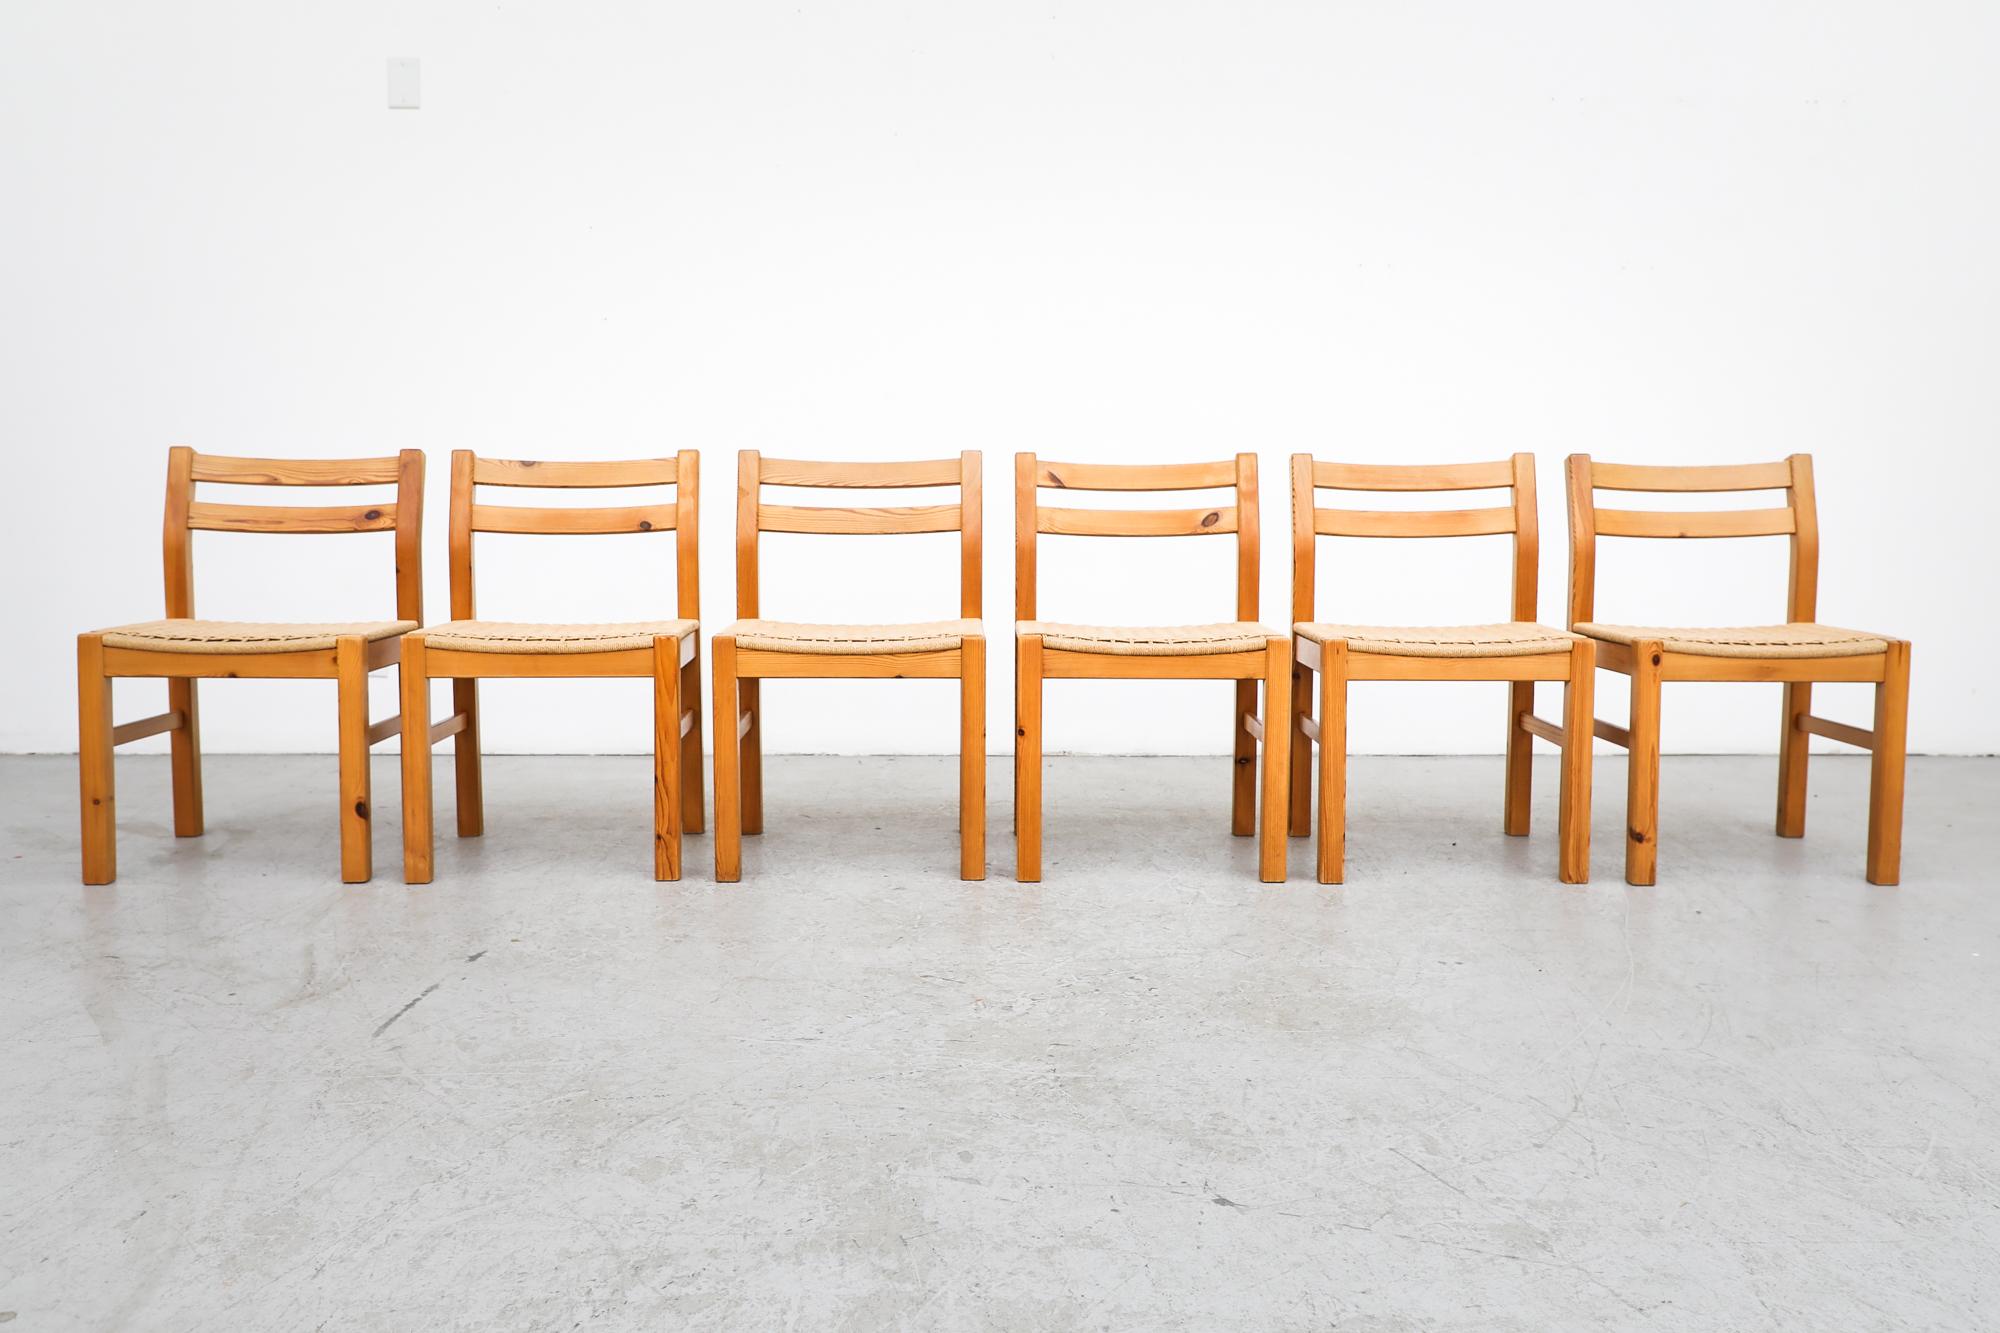 Vintage set of 6 Danish mid century Korup Stolefabrik dining chairs with solid pine frames and papercord seats. In original condition with visible wear consistent with their age and use. Priced as a set.